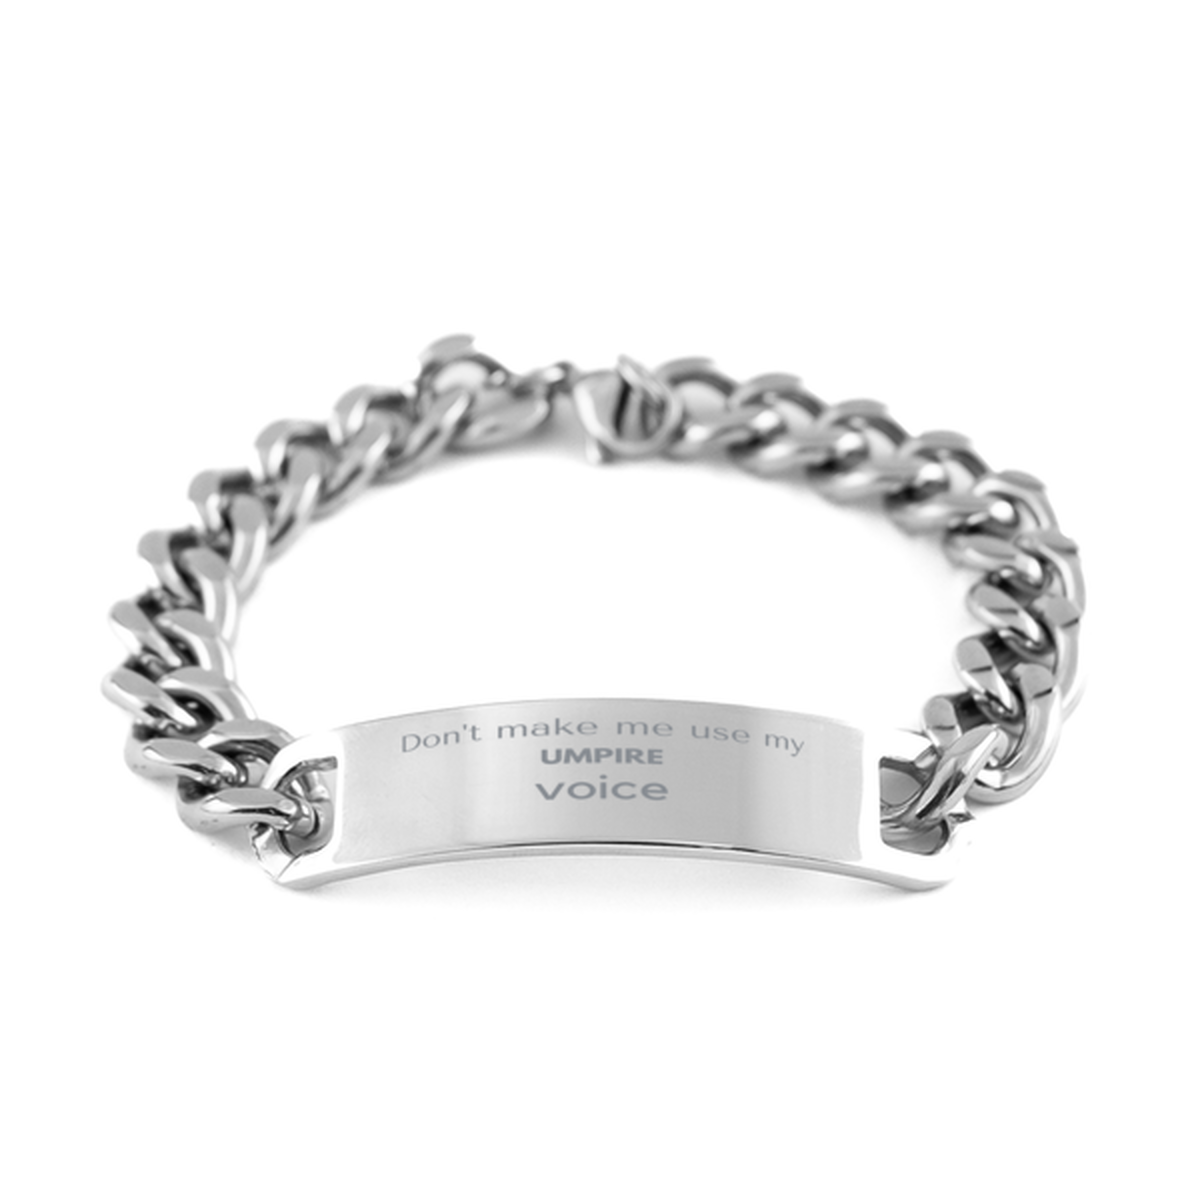 Don't make me use my Umpire voice, Sarcasm Umpire Gifts, Christmas Umpire Cuban Chain Stainless Steel Bracelet Birthday Unique Gifts For Umpire Coworkers, Men, Women, Colleague, Friends